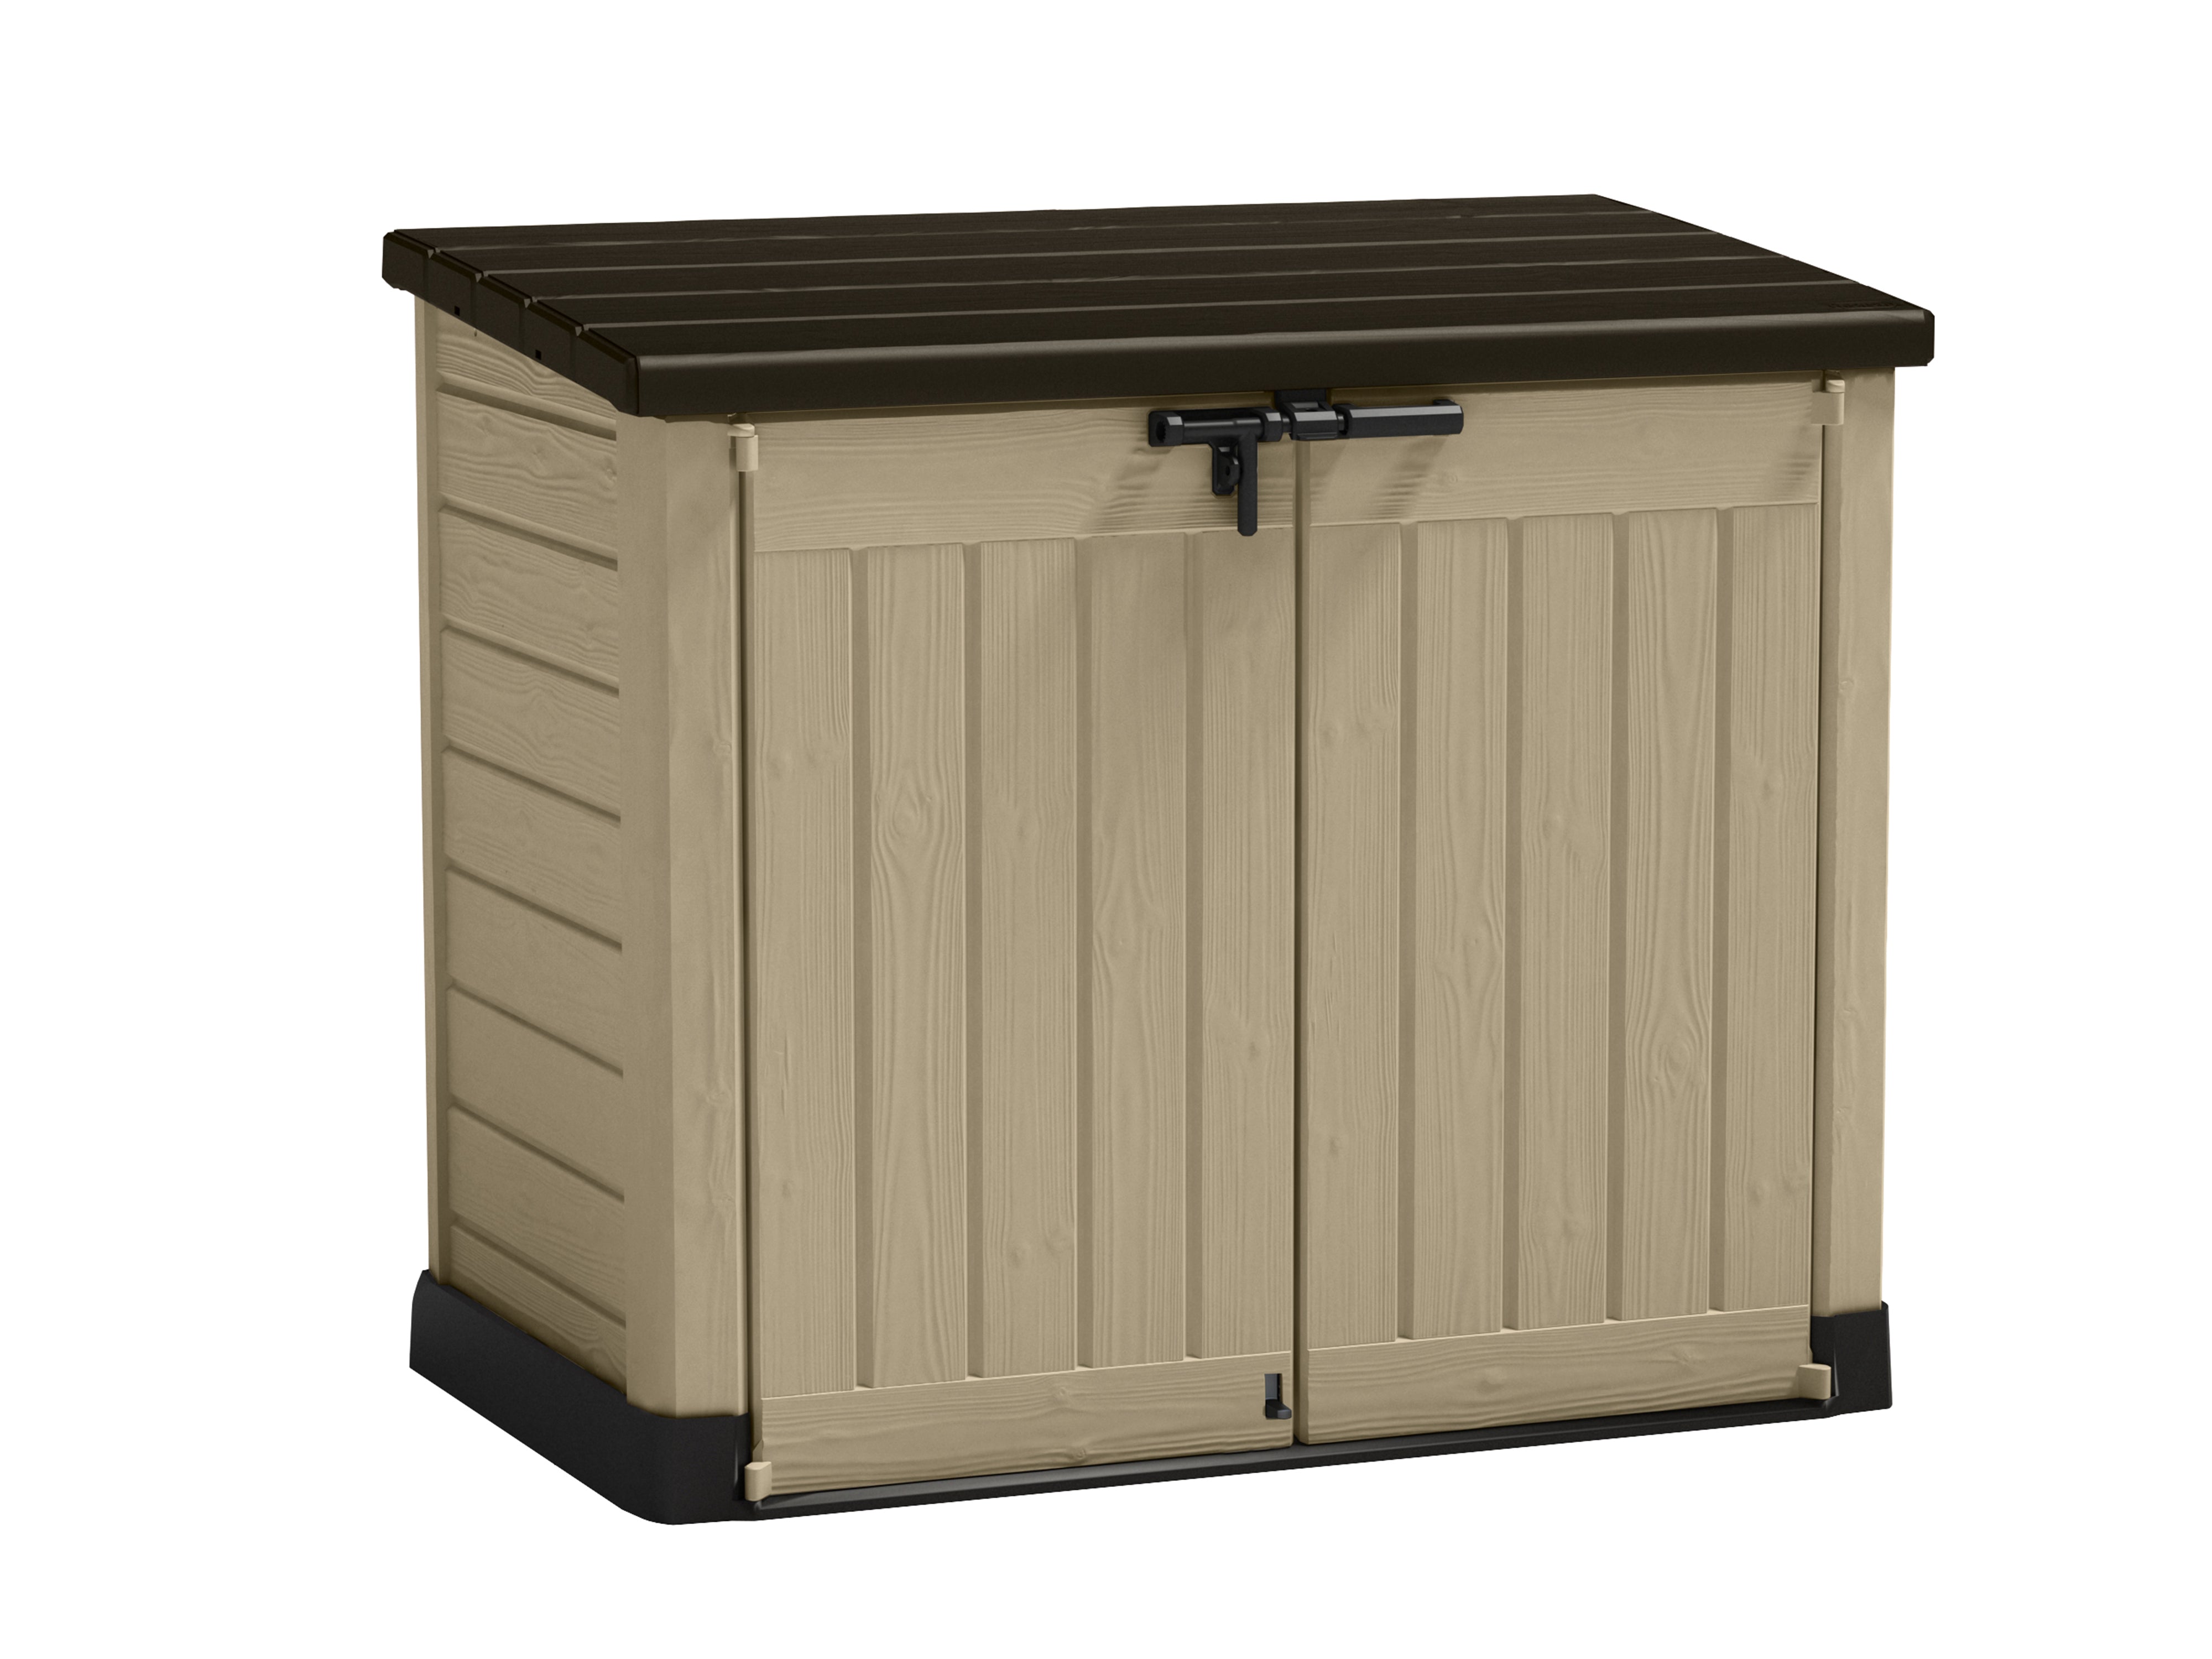 Image of Keter Store It Out Max Wheeled Storage Shed